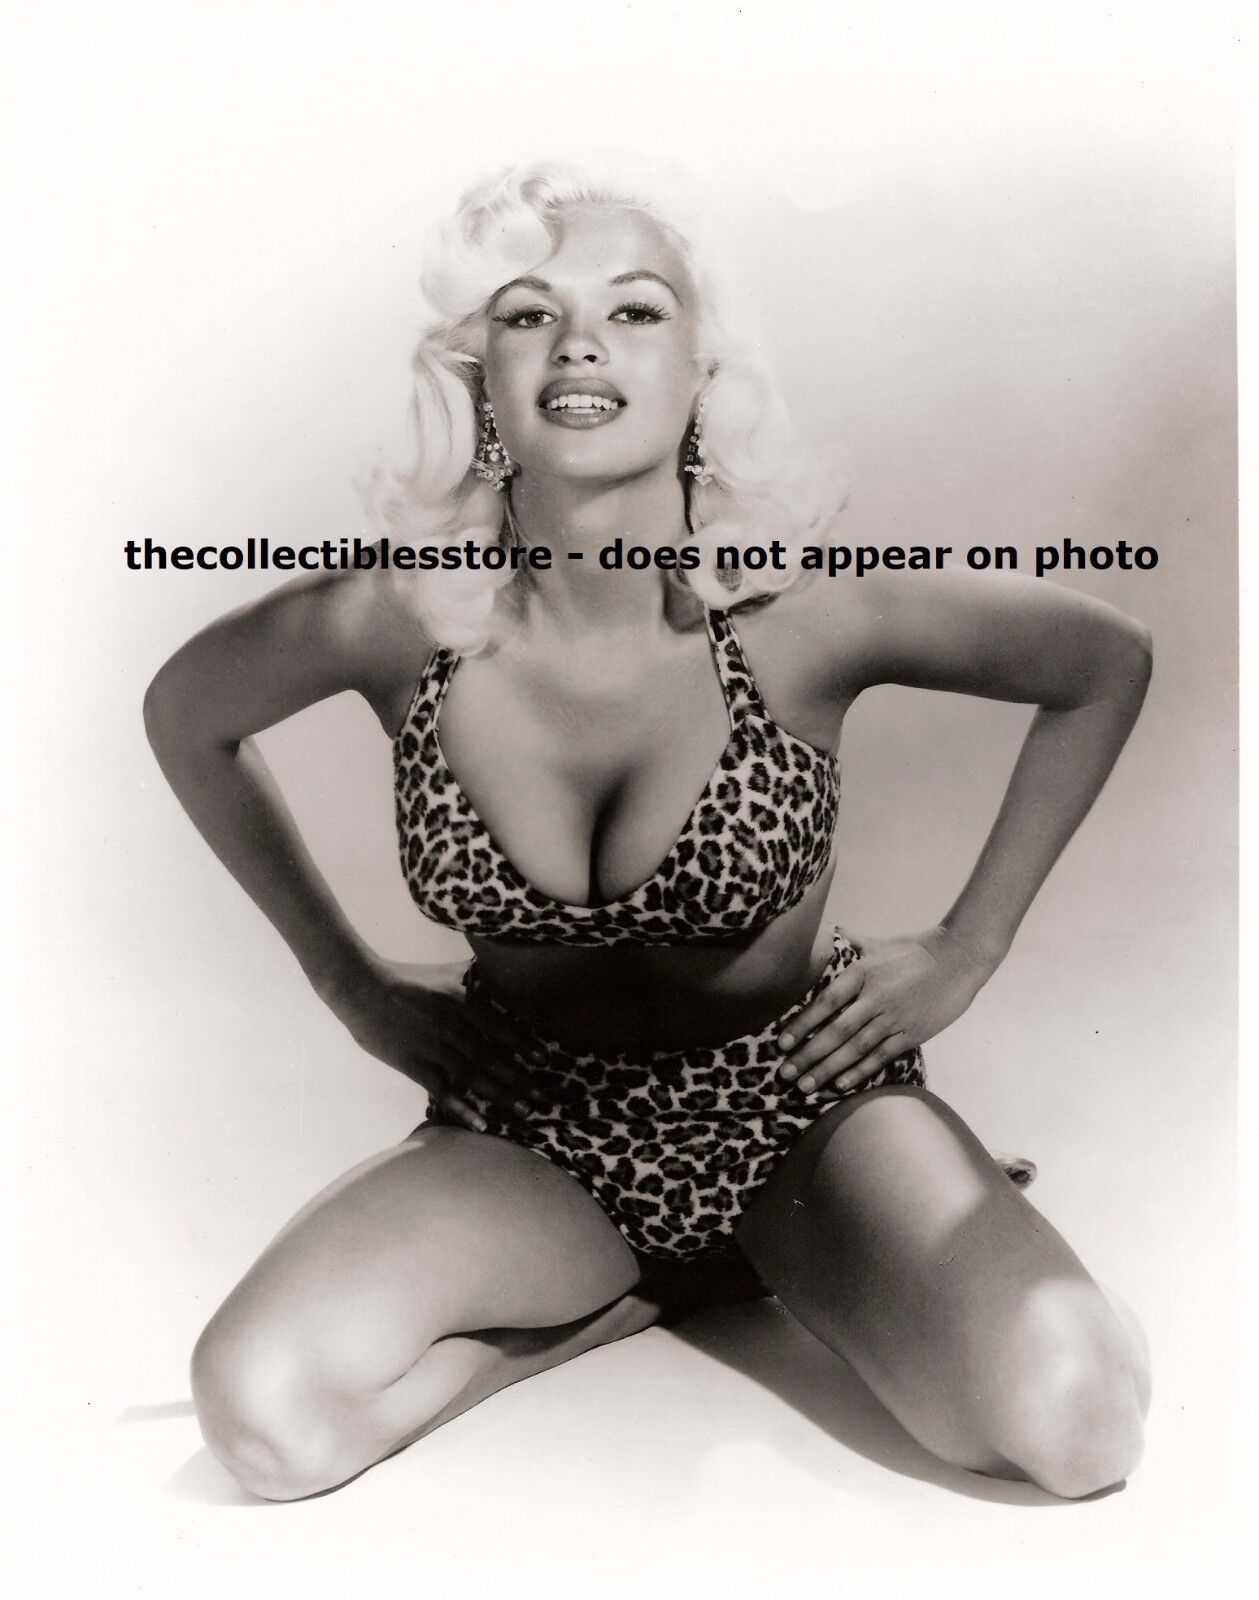 dominic avon recommends jayne mansfield playboy photos pic